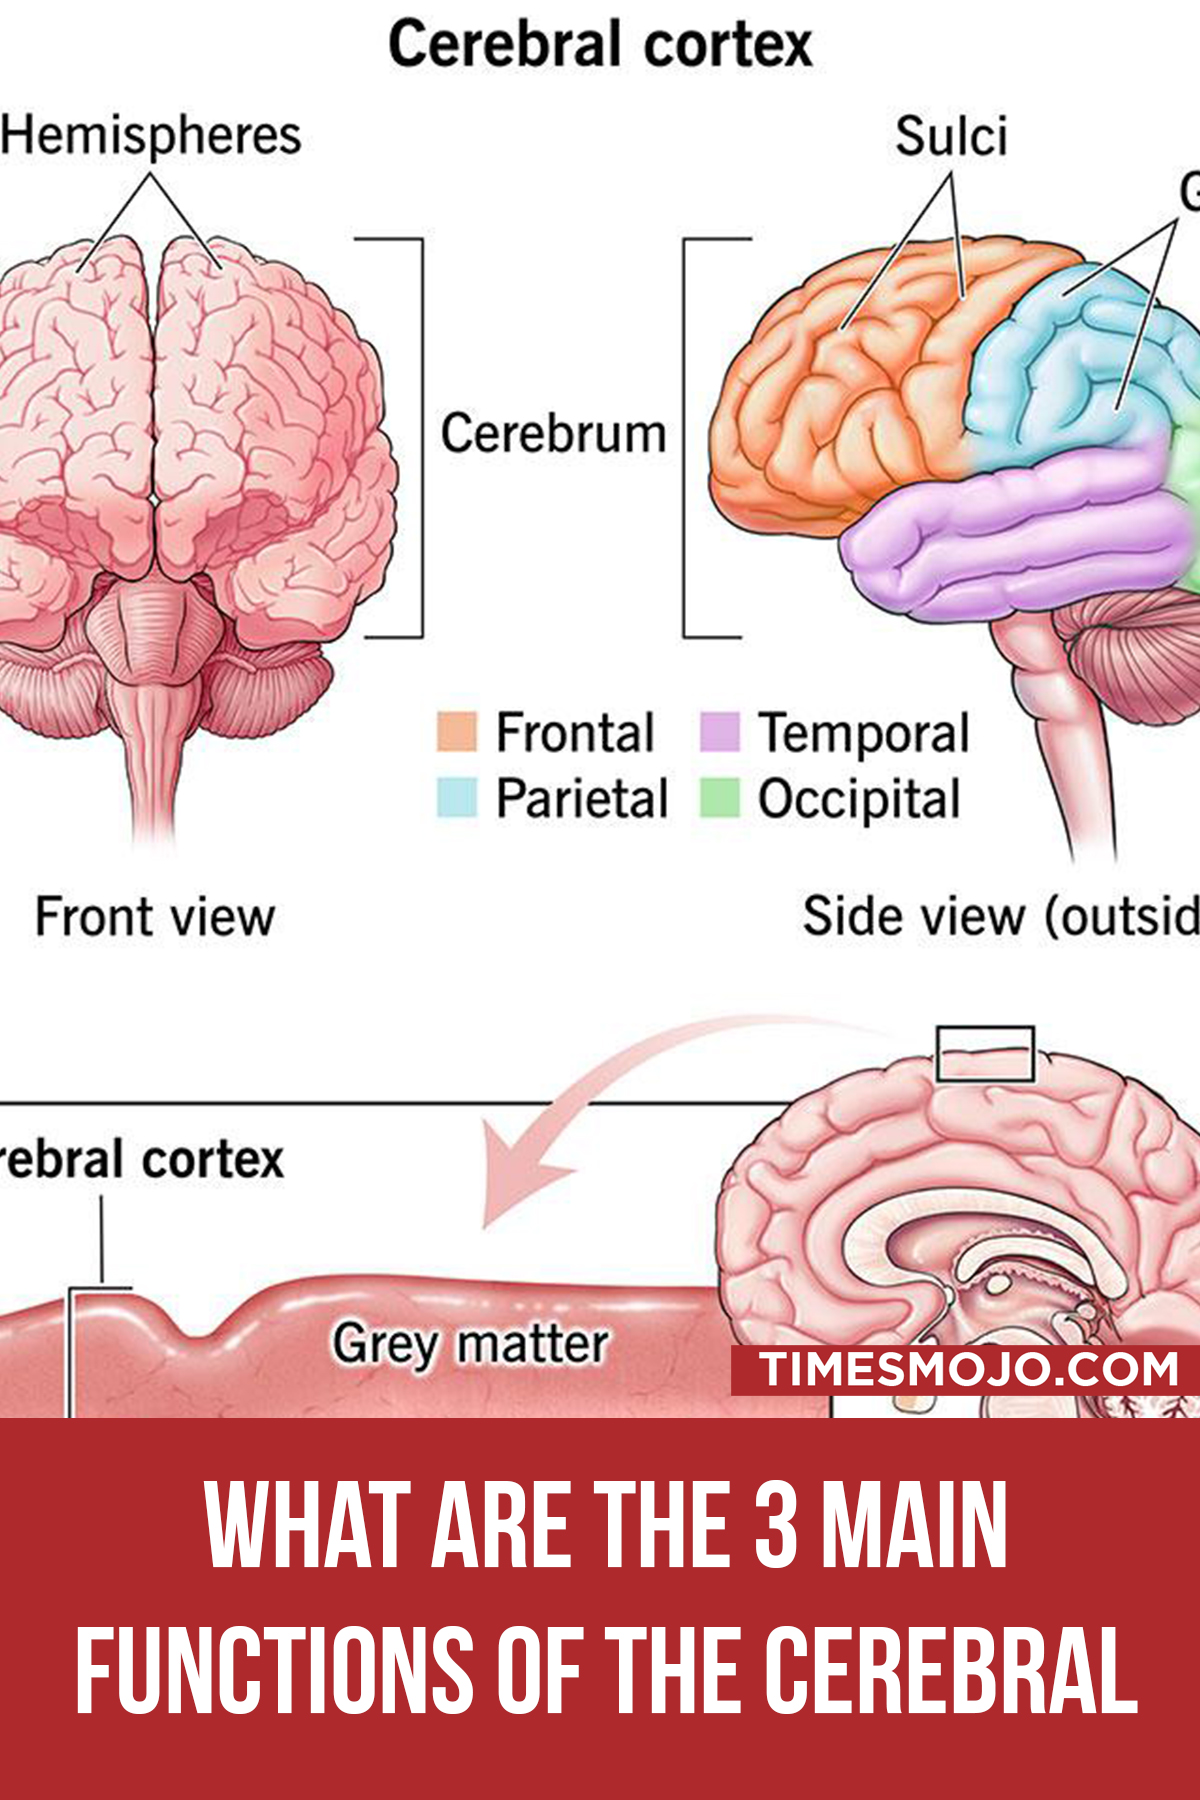 What Are The 3 Main Functions Of The Cerebral Cortex